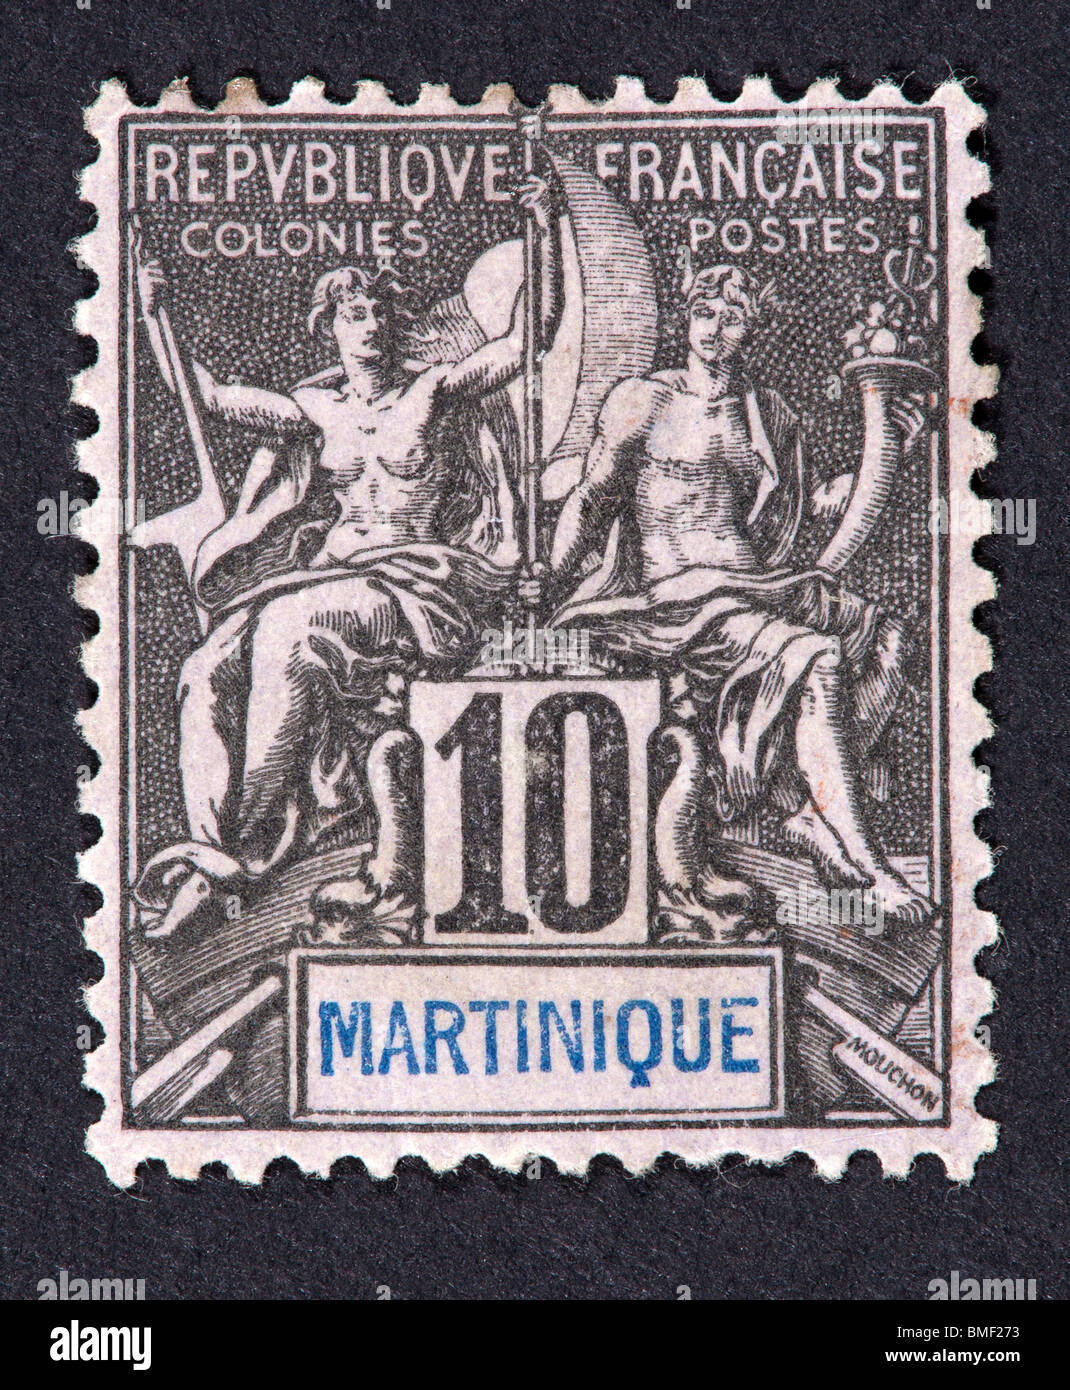 Postage stamp from Martinique depicting Peace and Commerce (allegory), issued as a French colony. Stock Photo